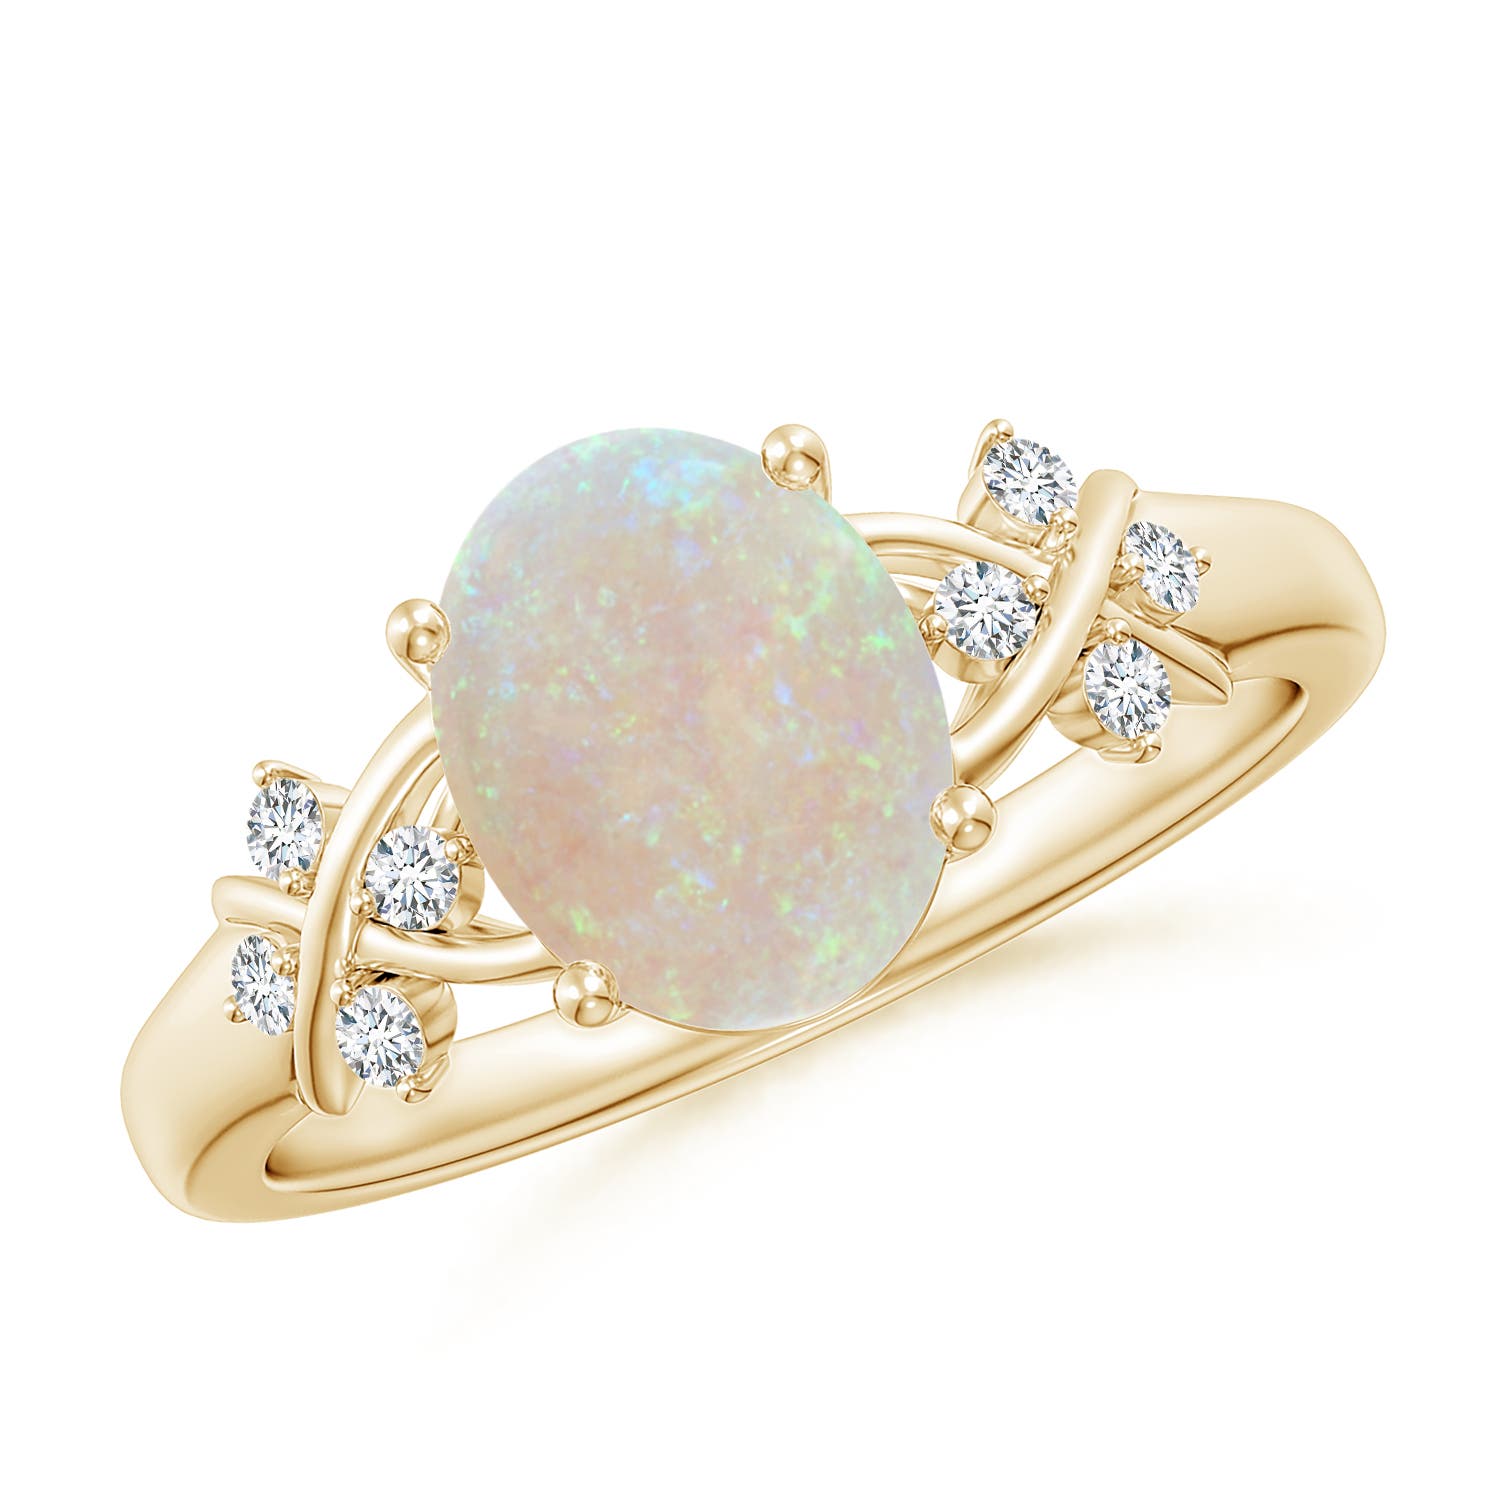 AA - Opal / 1.21 CT / 14 KT Yellow Gold